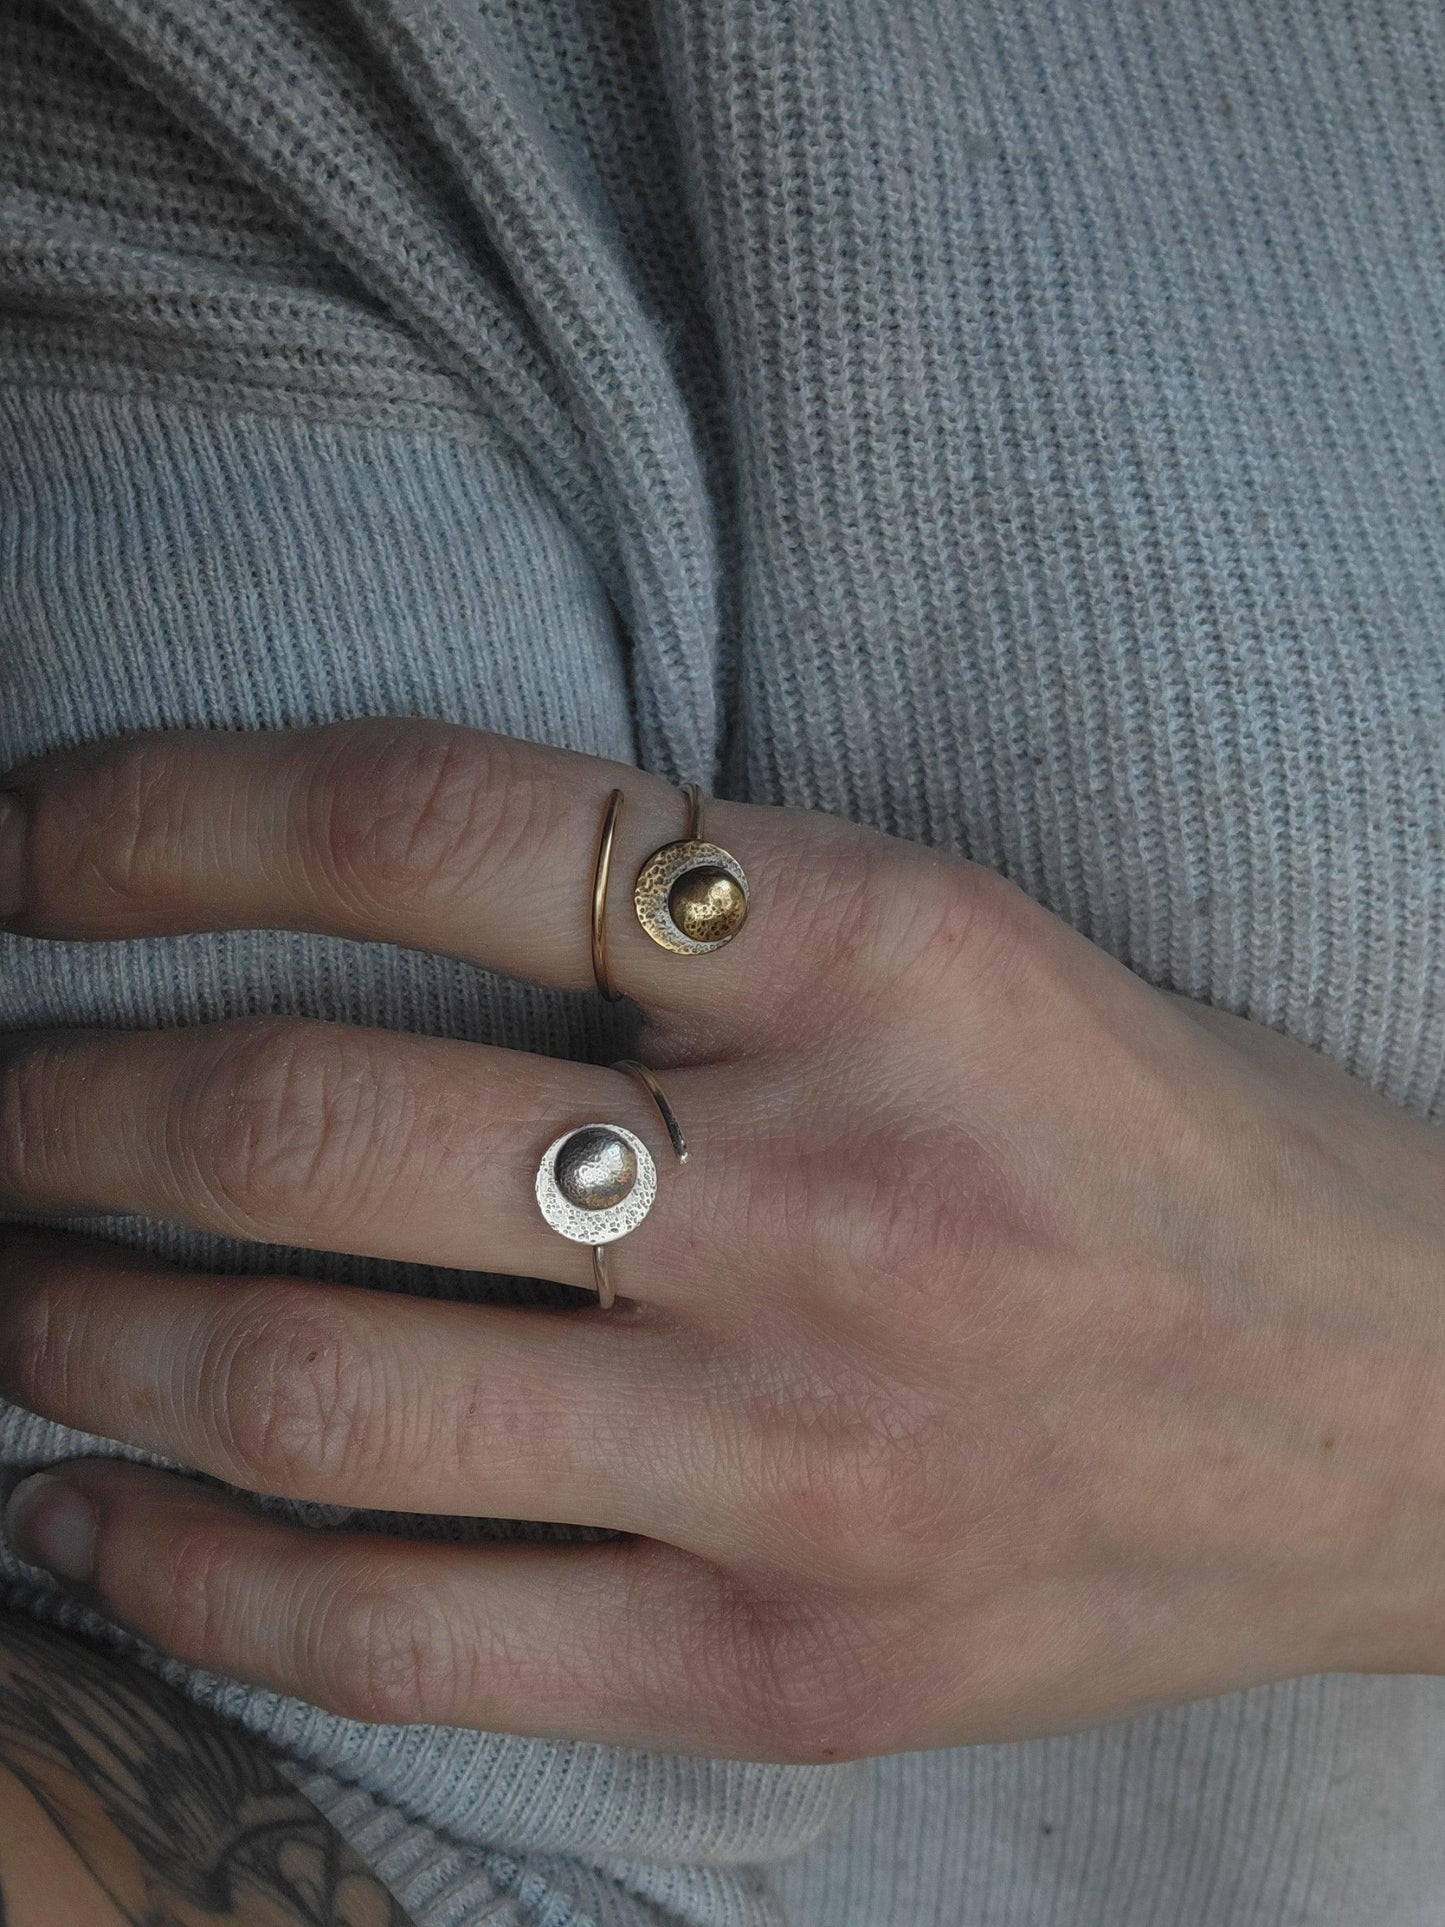 Adjustable Reflections Moon Ring for resilience and strength, shown in gold and sterling silver on a woman's hand.